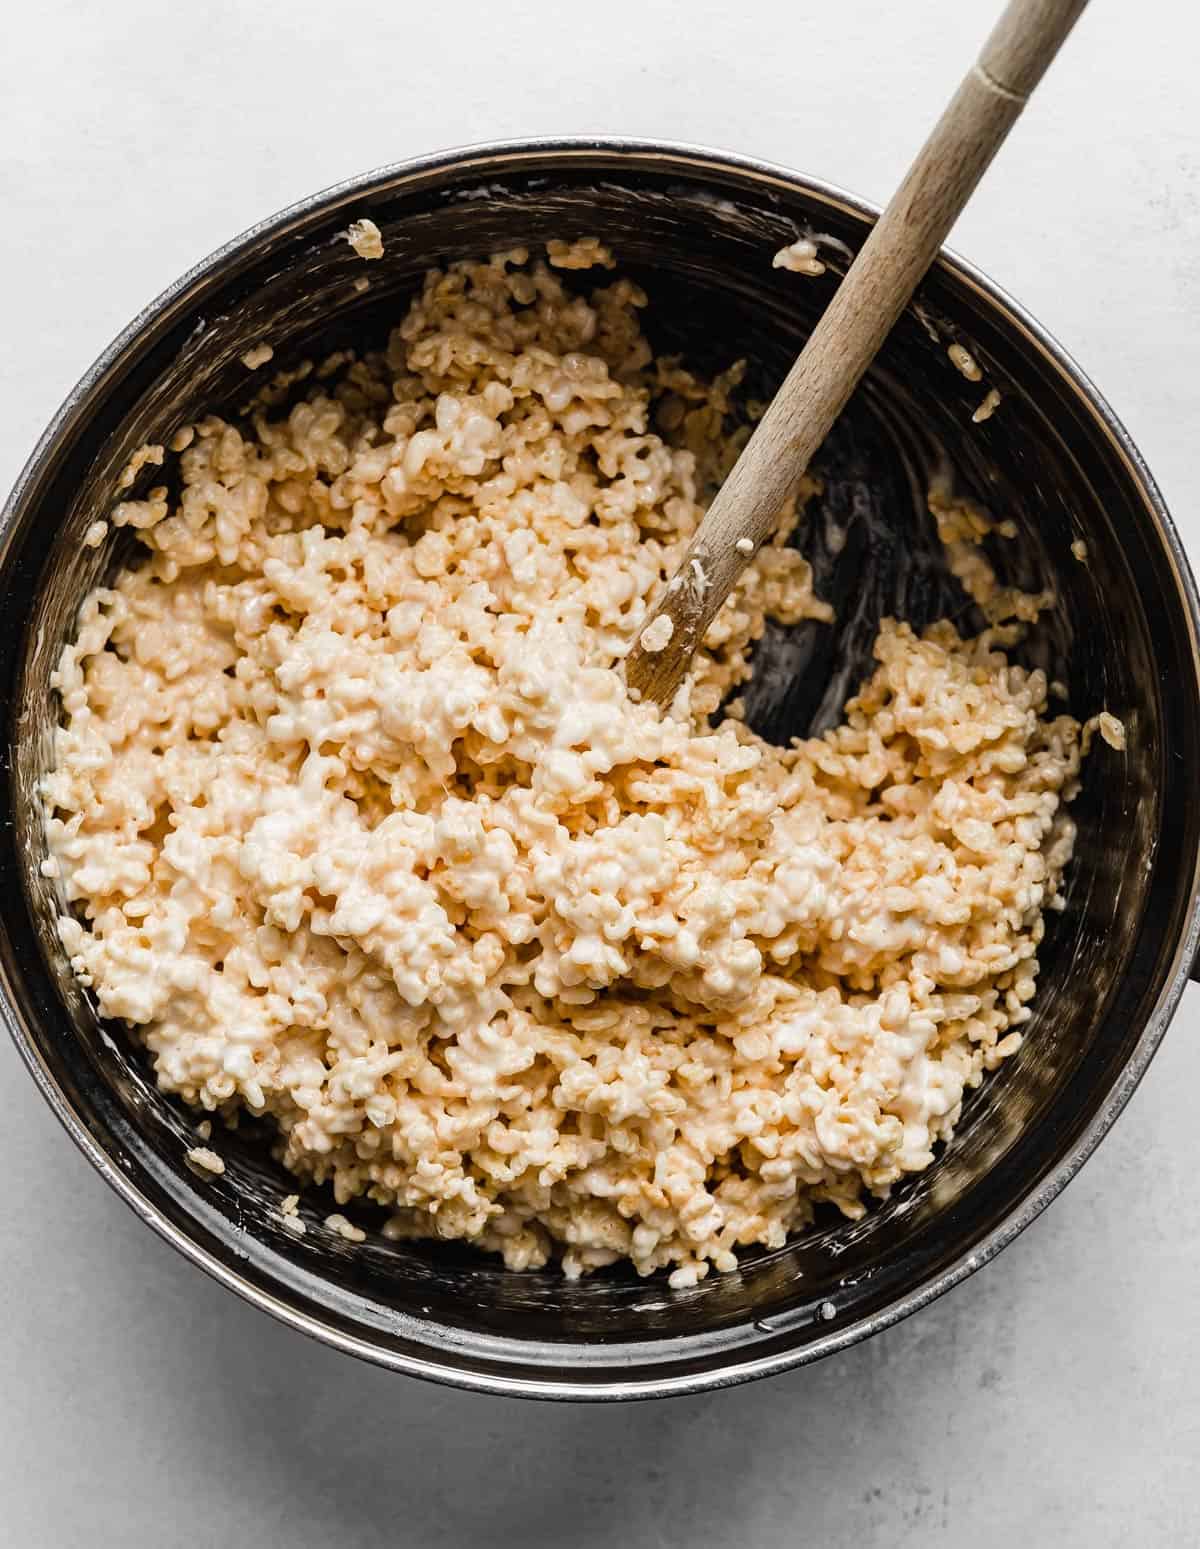 Gooey Rice Krispies Treats being stirred together in a large black pot.